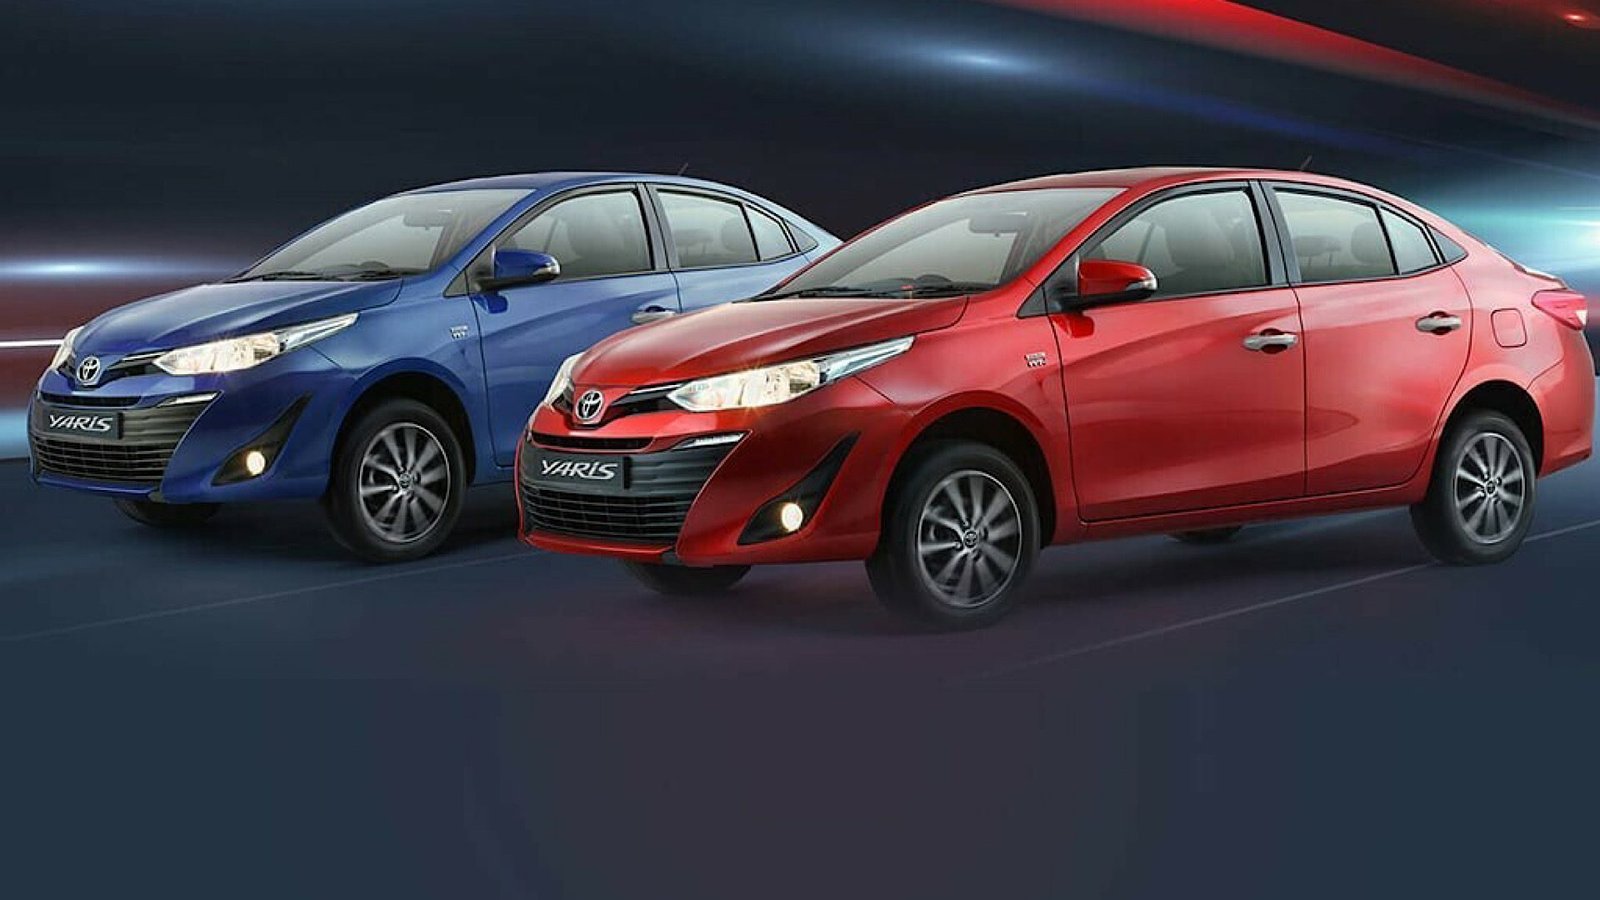 Toyota to launch new Yaris facelift in Pakistan: Report